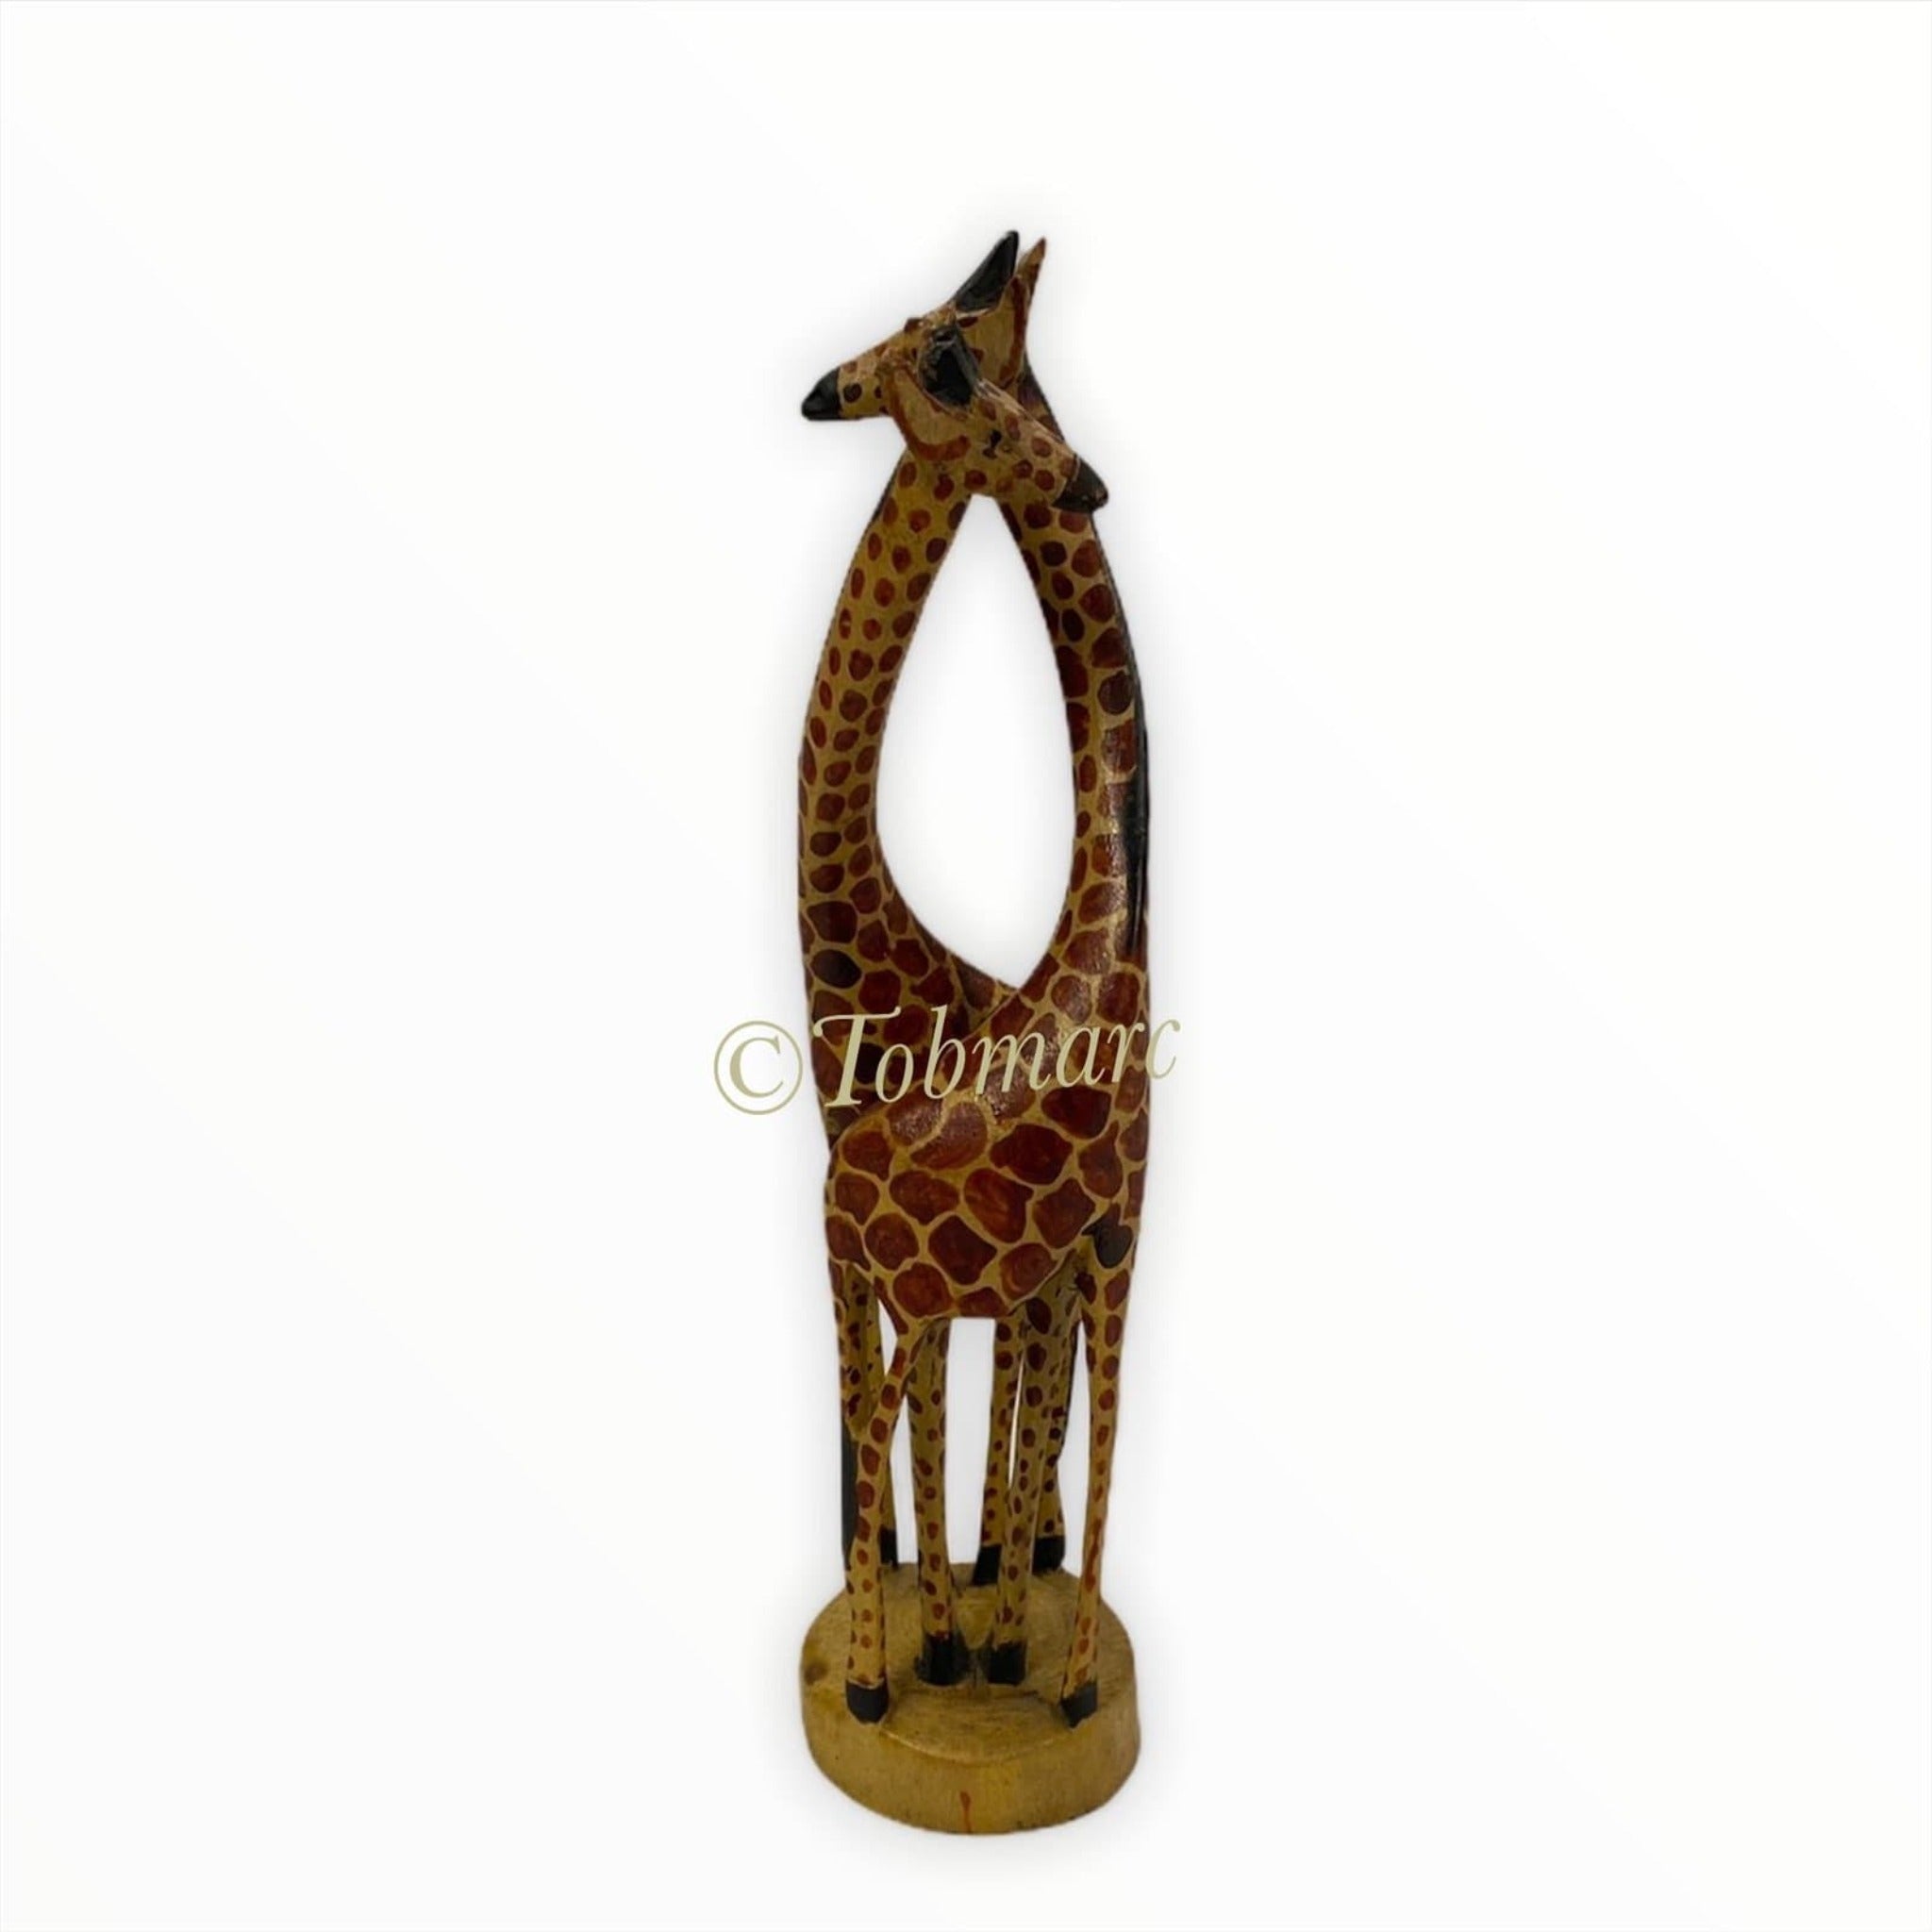 Tobmarc Home Decor & Gifts  Sculpture & Carvings Wooden Giraffe sculpture, Small Wood giraffe, Wooden Giraffes, Giraffe sculpture